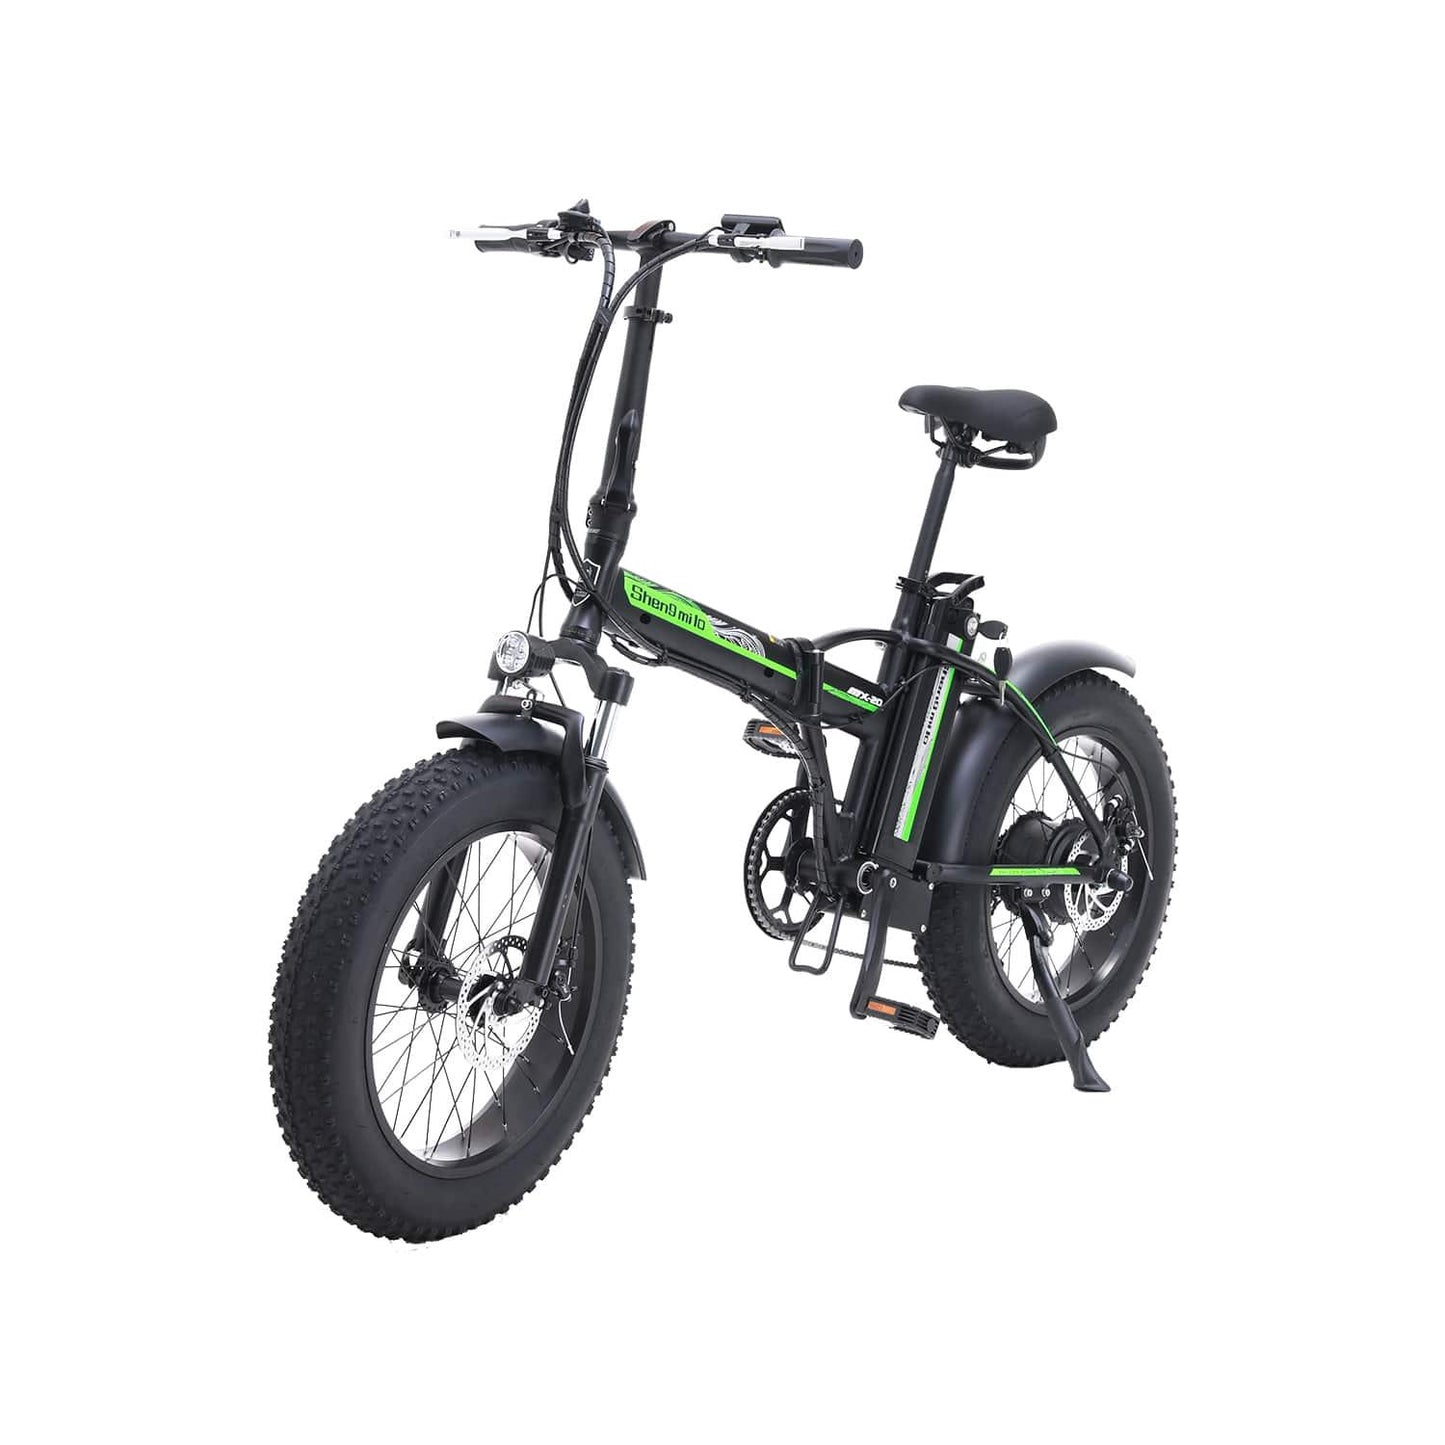 Shengmilo MX20 Electric Bike - Pogo cycles UK -cycle to work scheme available